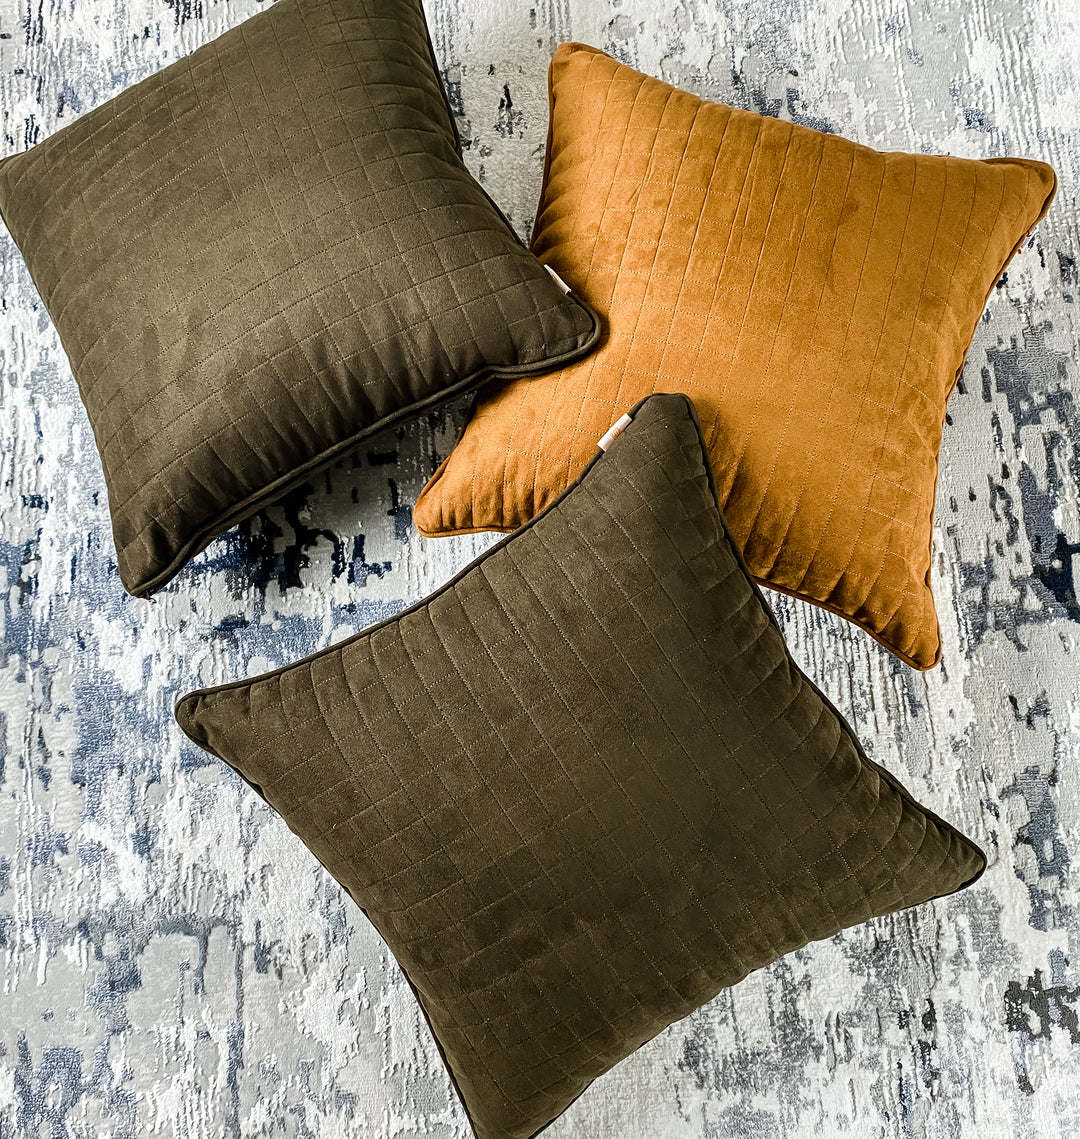 Suede Stitch Pipping Cushion Cover